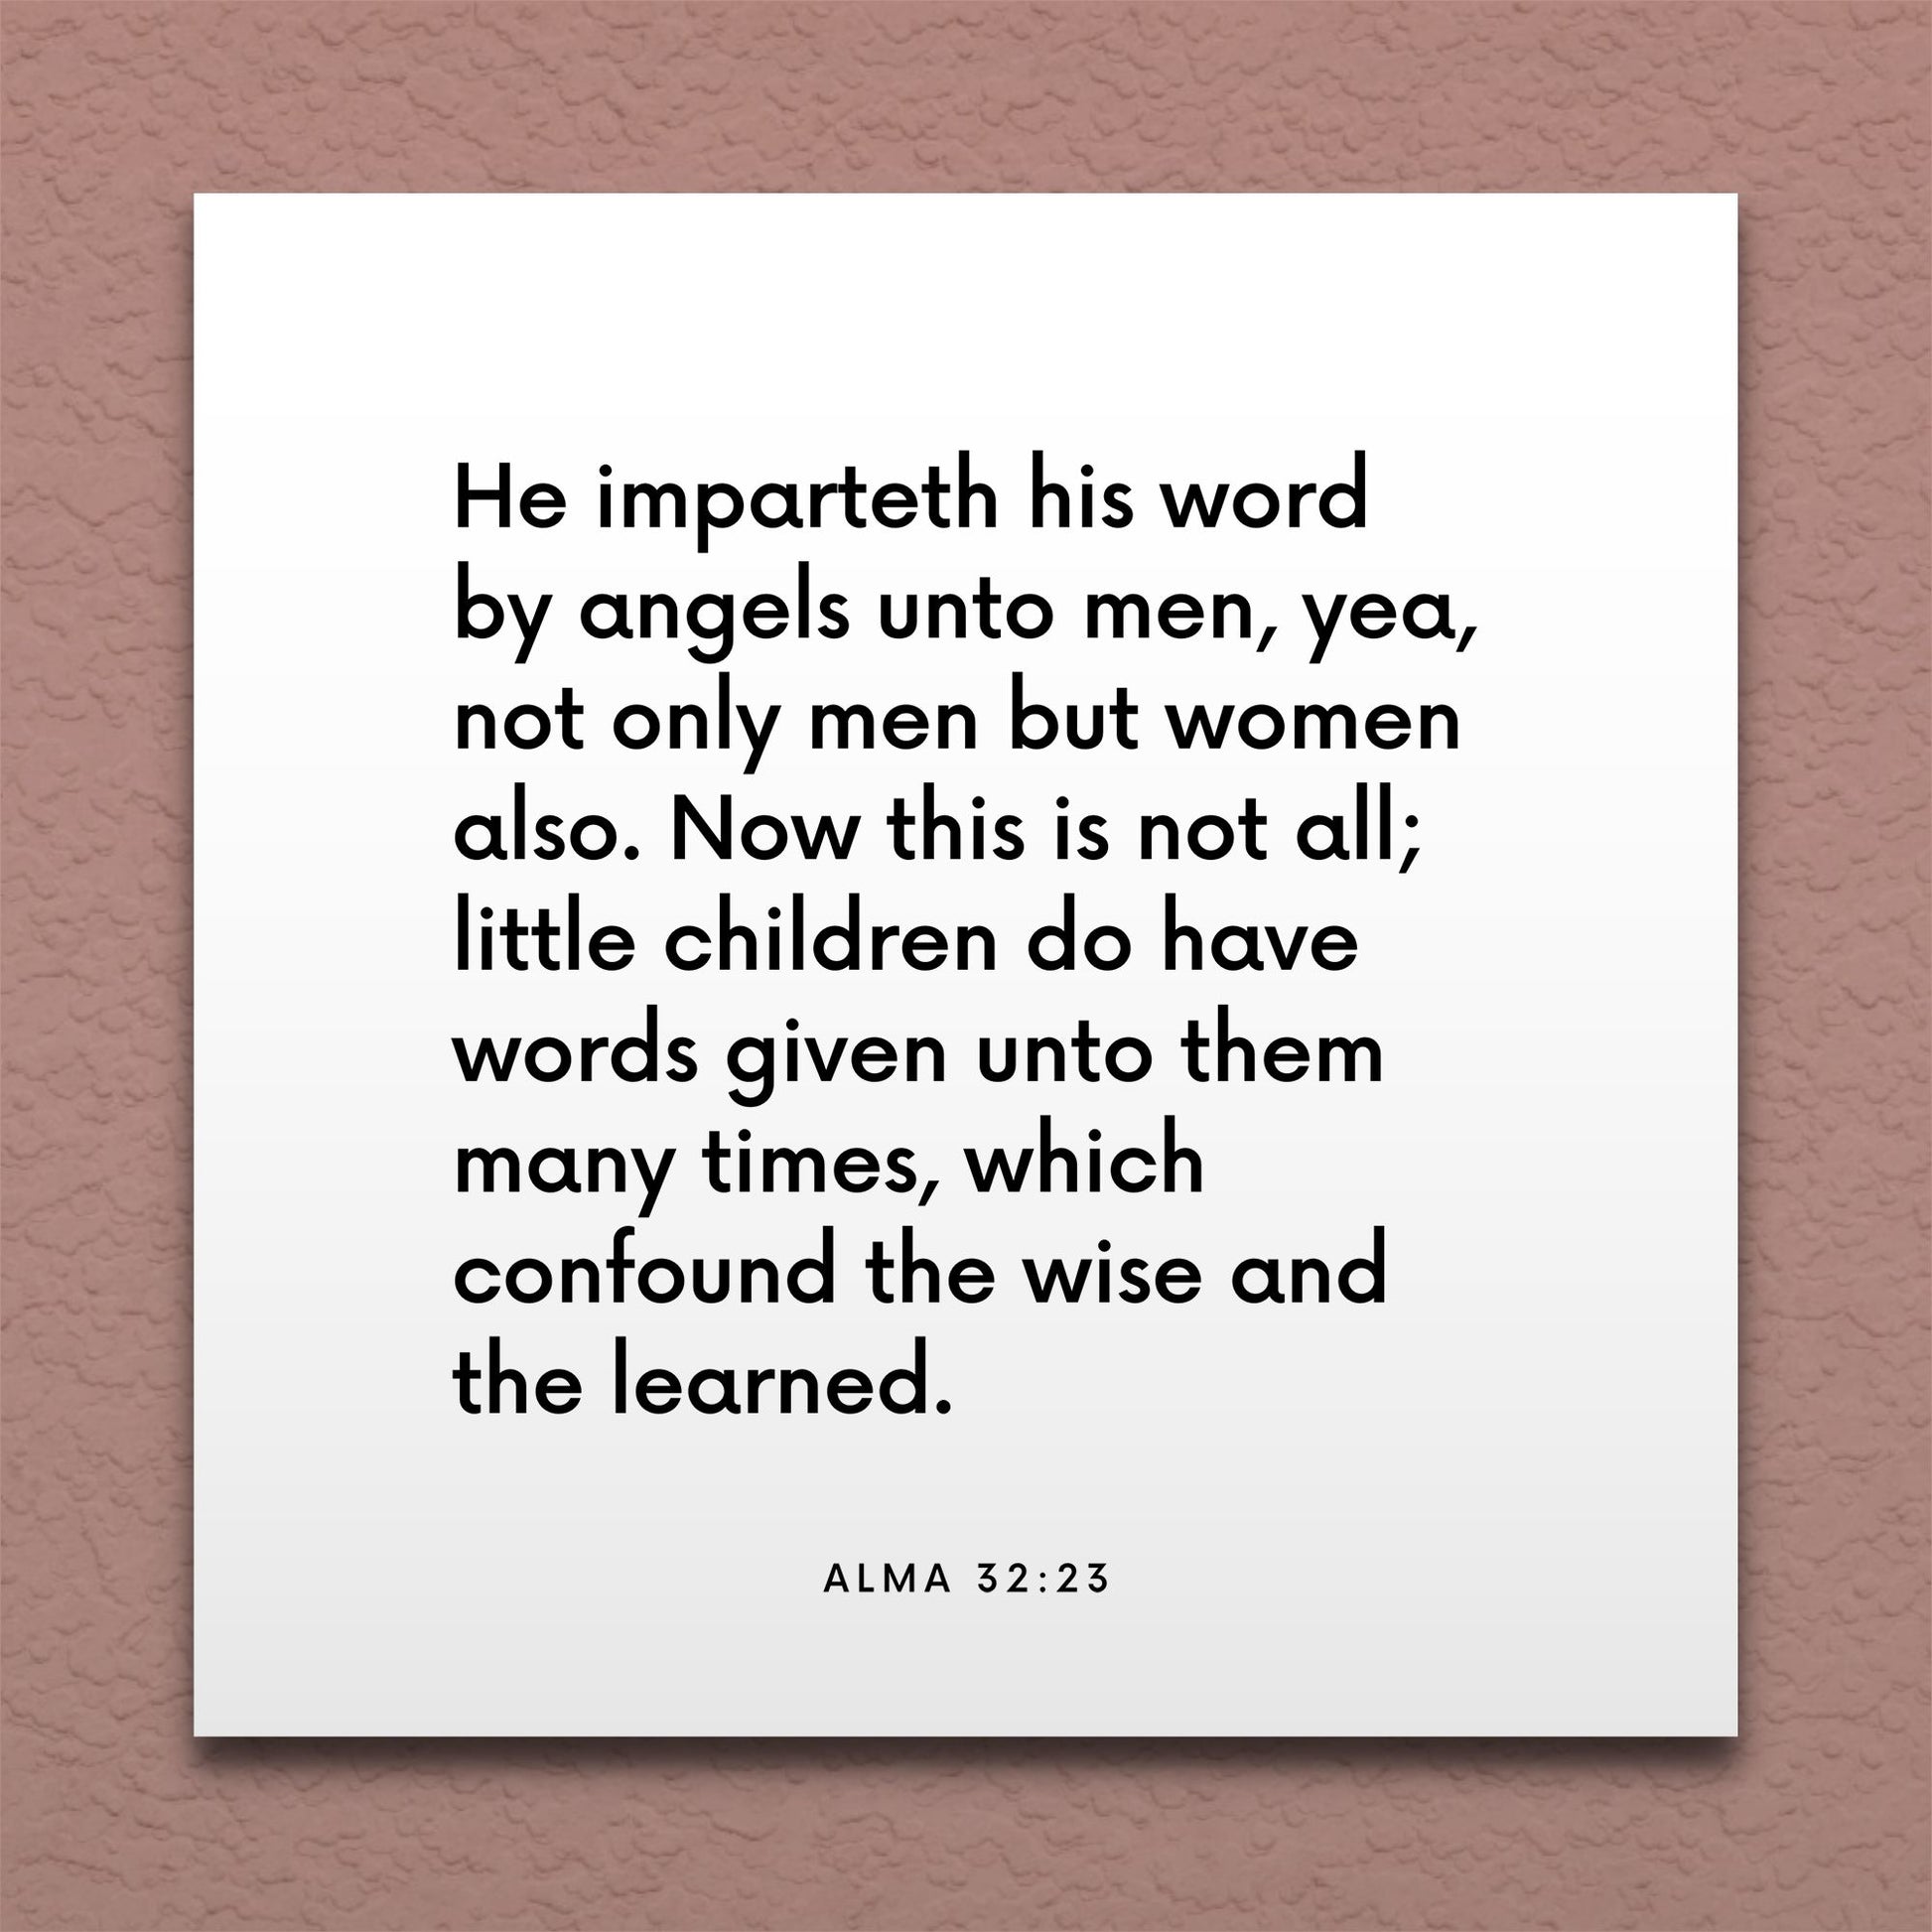 Wall-mounted scripture tile for Alma 32:23 - "Little children do have words given unto them"